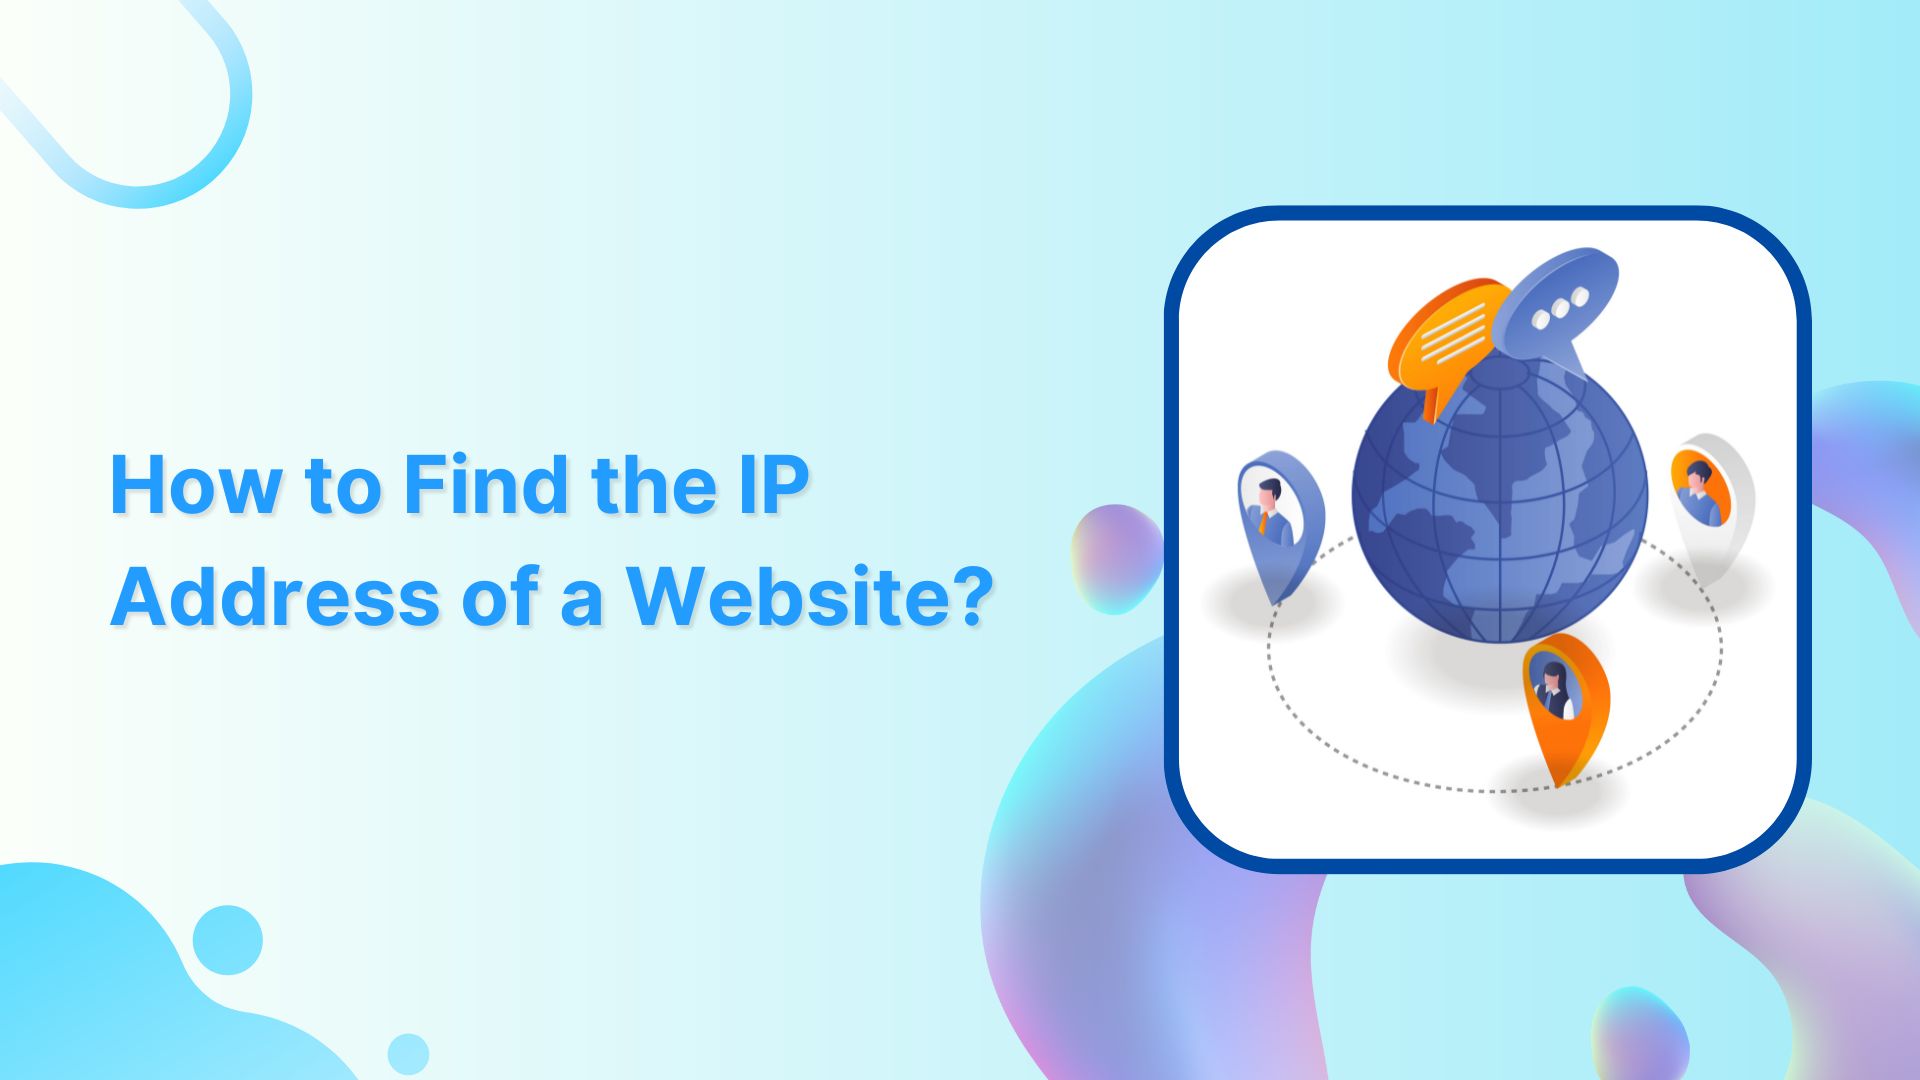 How to Find the IP Address of a Website: Step-by-Step Guide